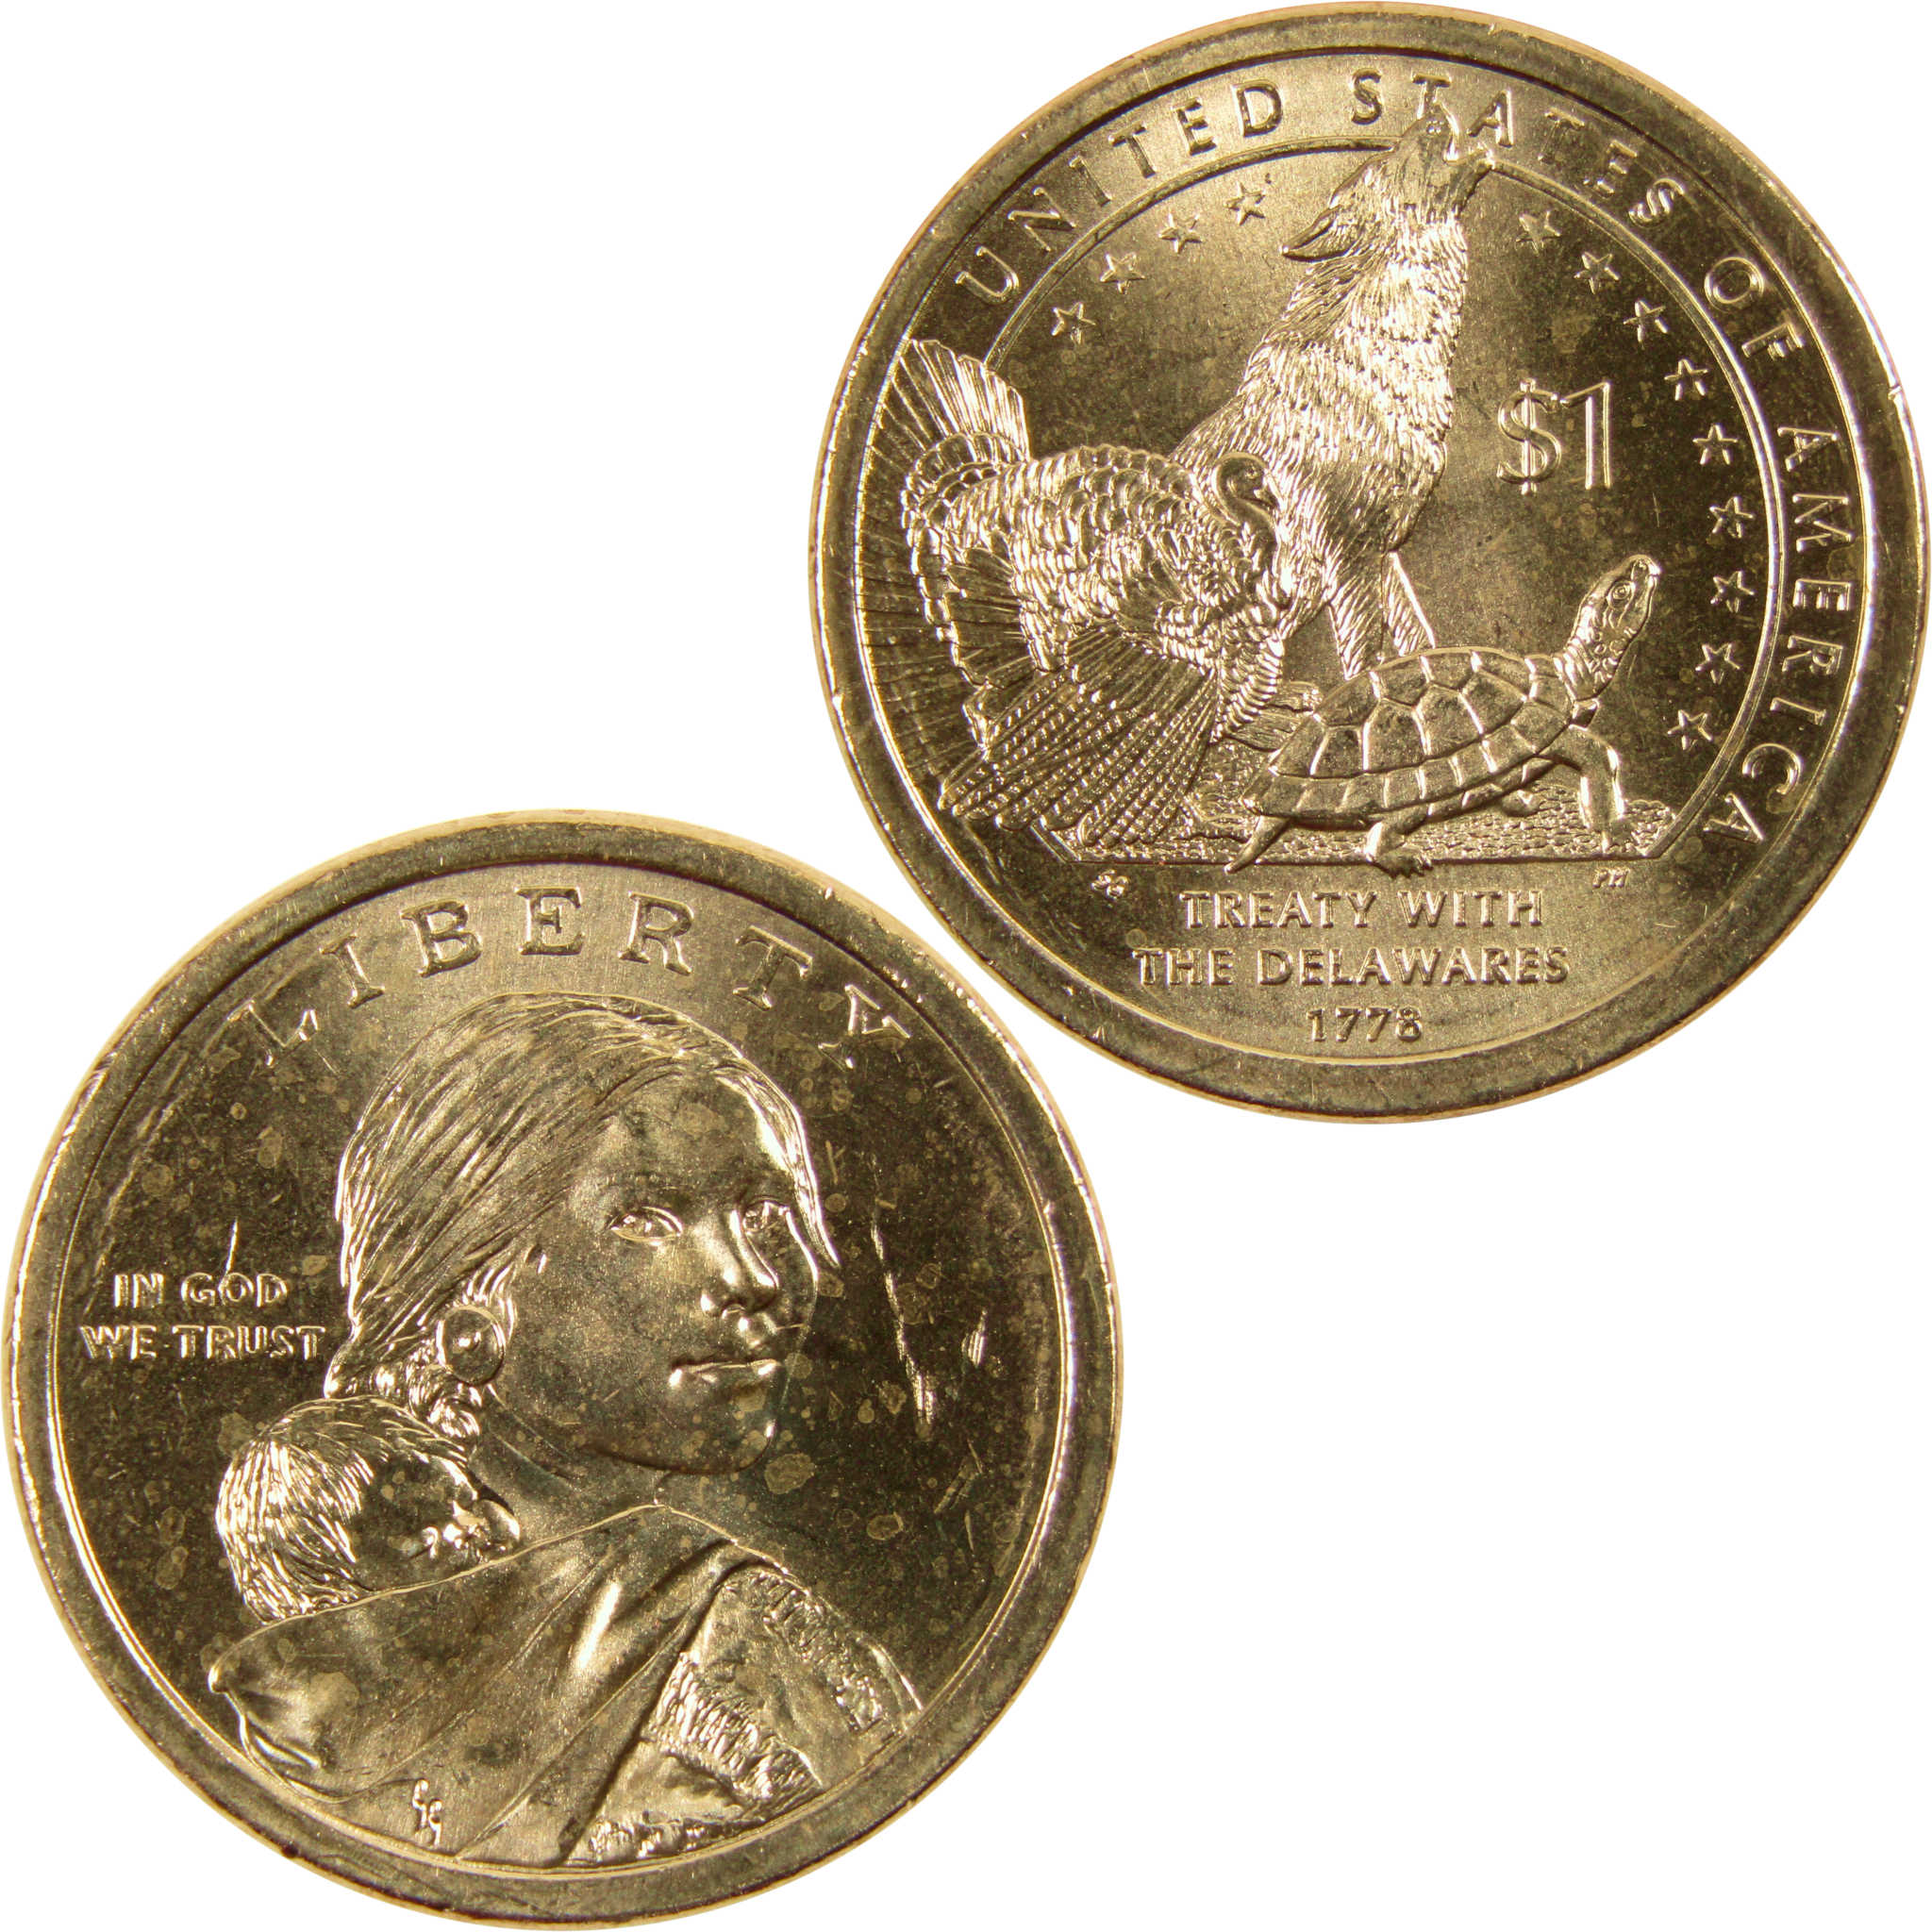 2013 P Treaty with the Delawares Native American Dollar Uncirculated